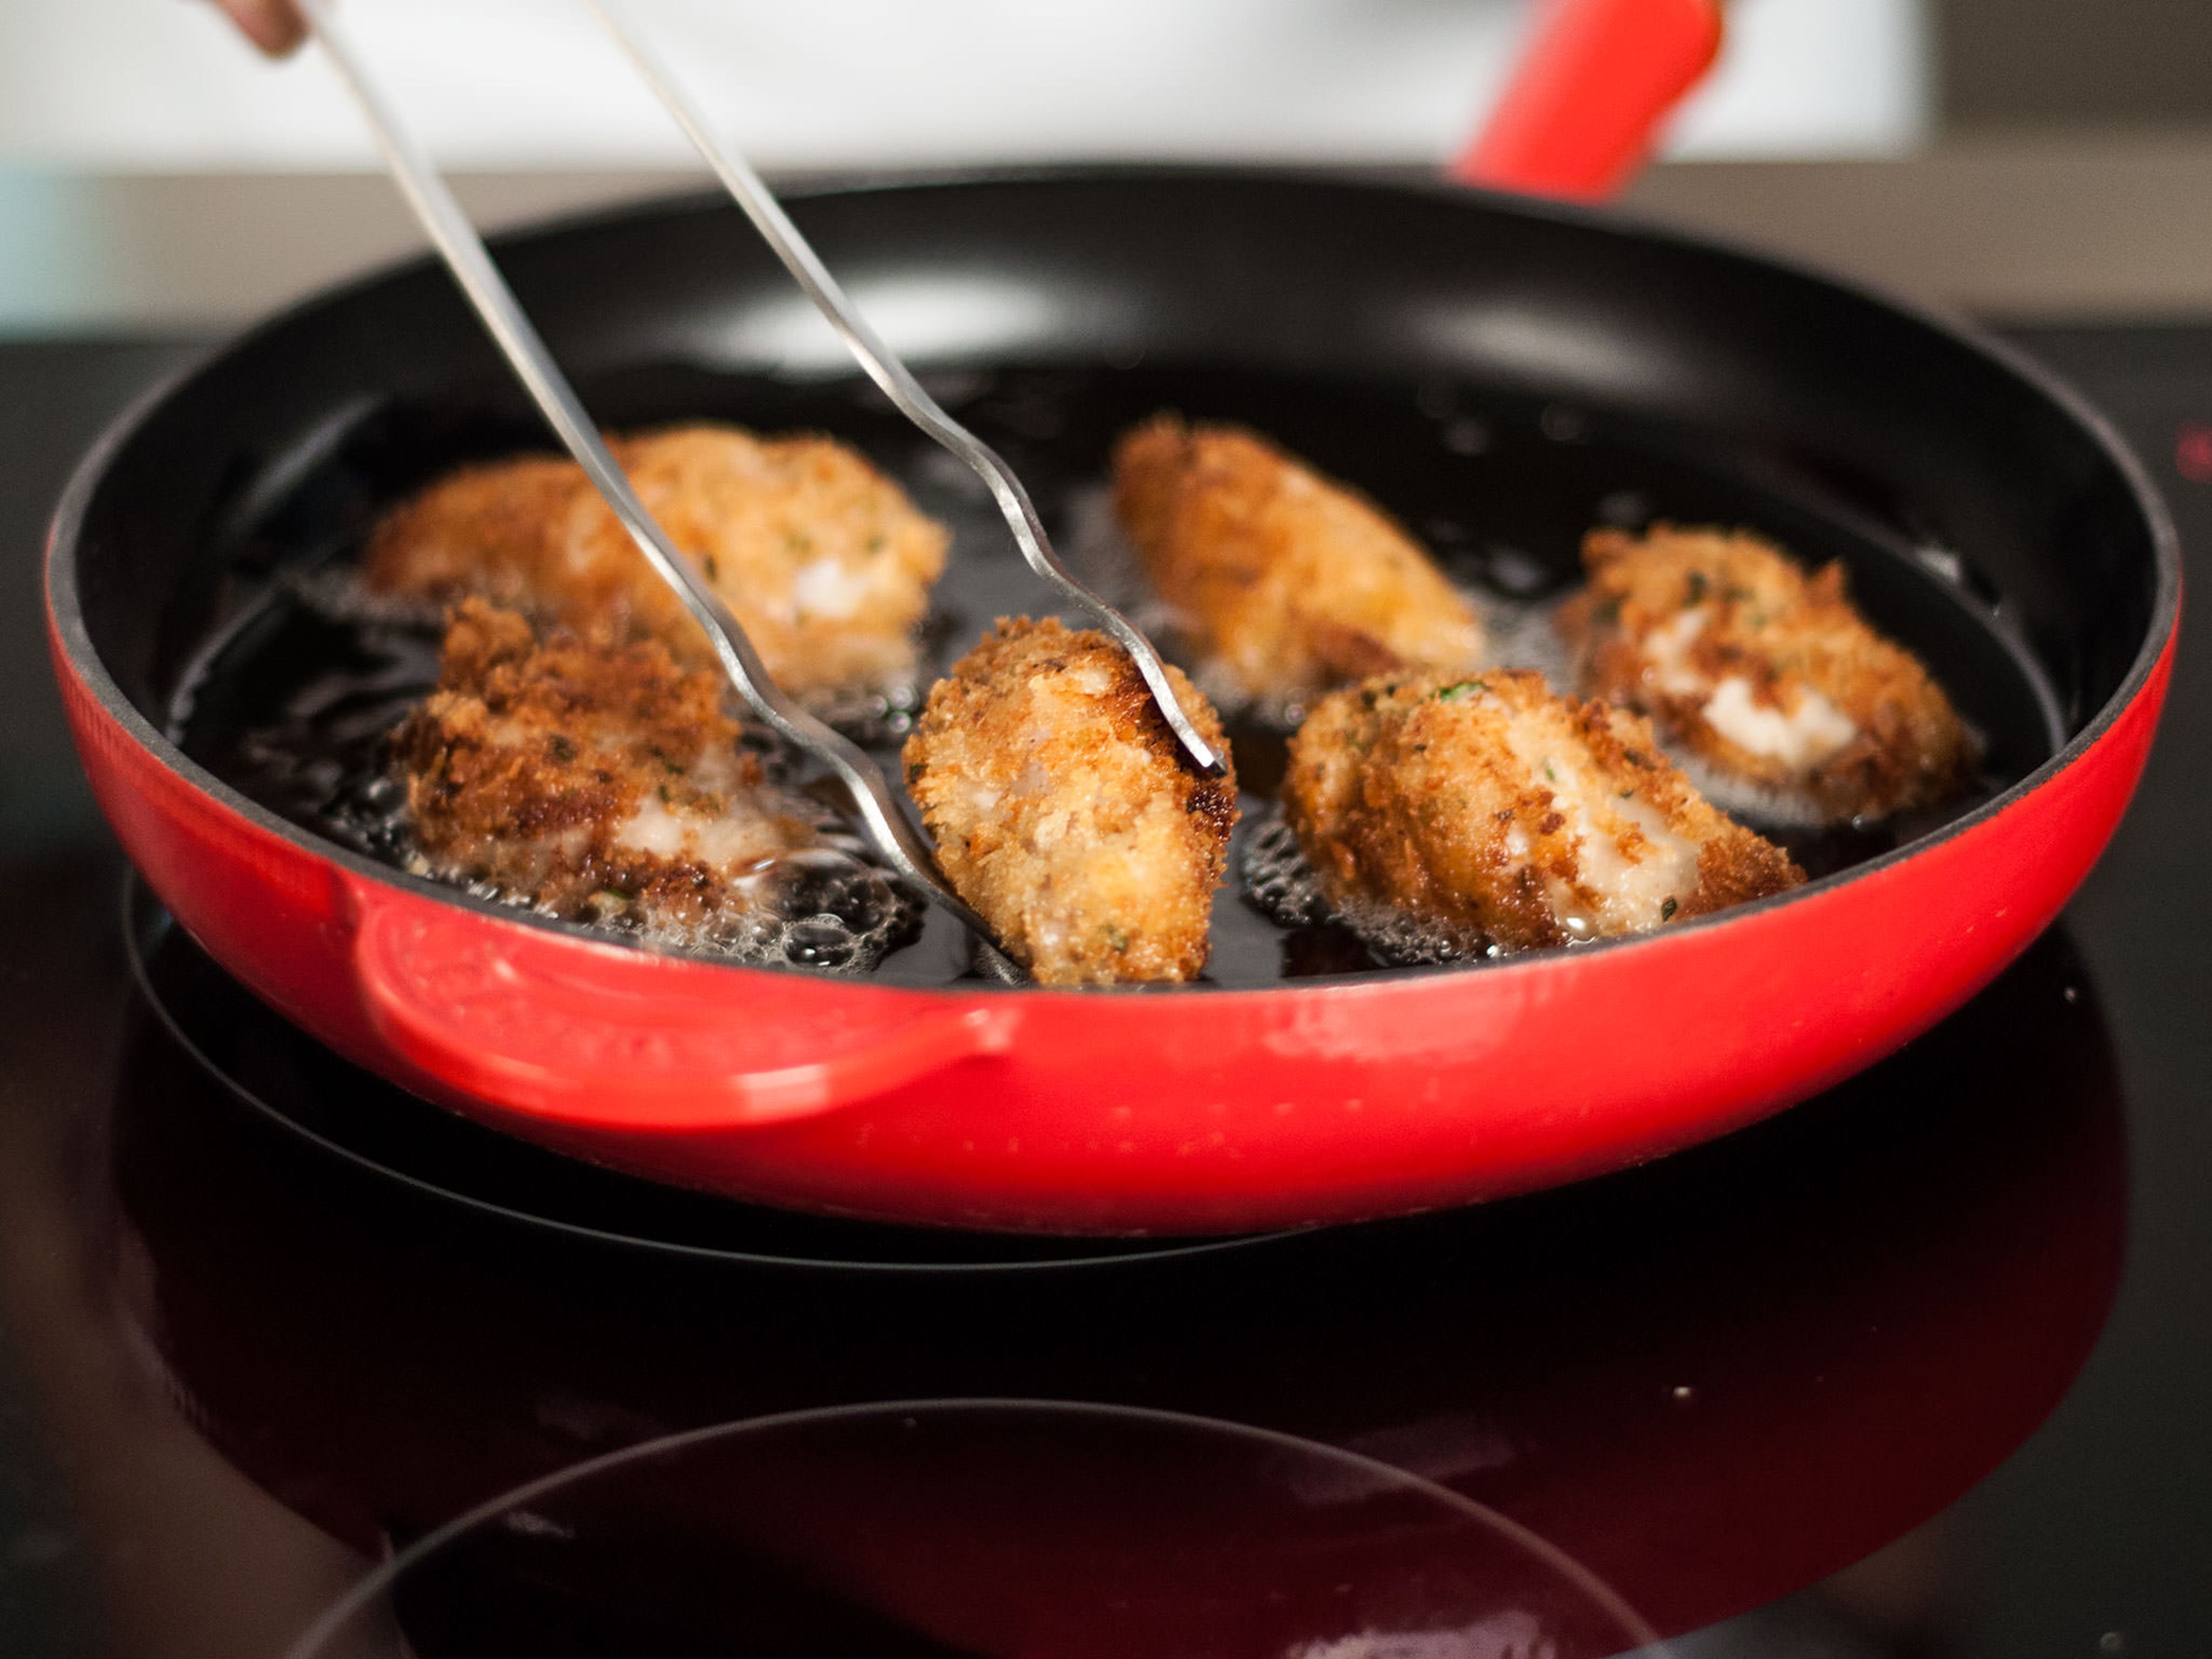 Heat a generous amount of vegetable oil in a frying pan. Once oil is hot, add chicken wings and cook until browned and cooked through, approx. 8 – 10 min. Rotate to cook on all sides. Enjoy with your favorite dipping sauce.